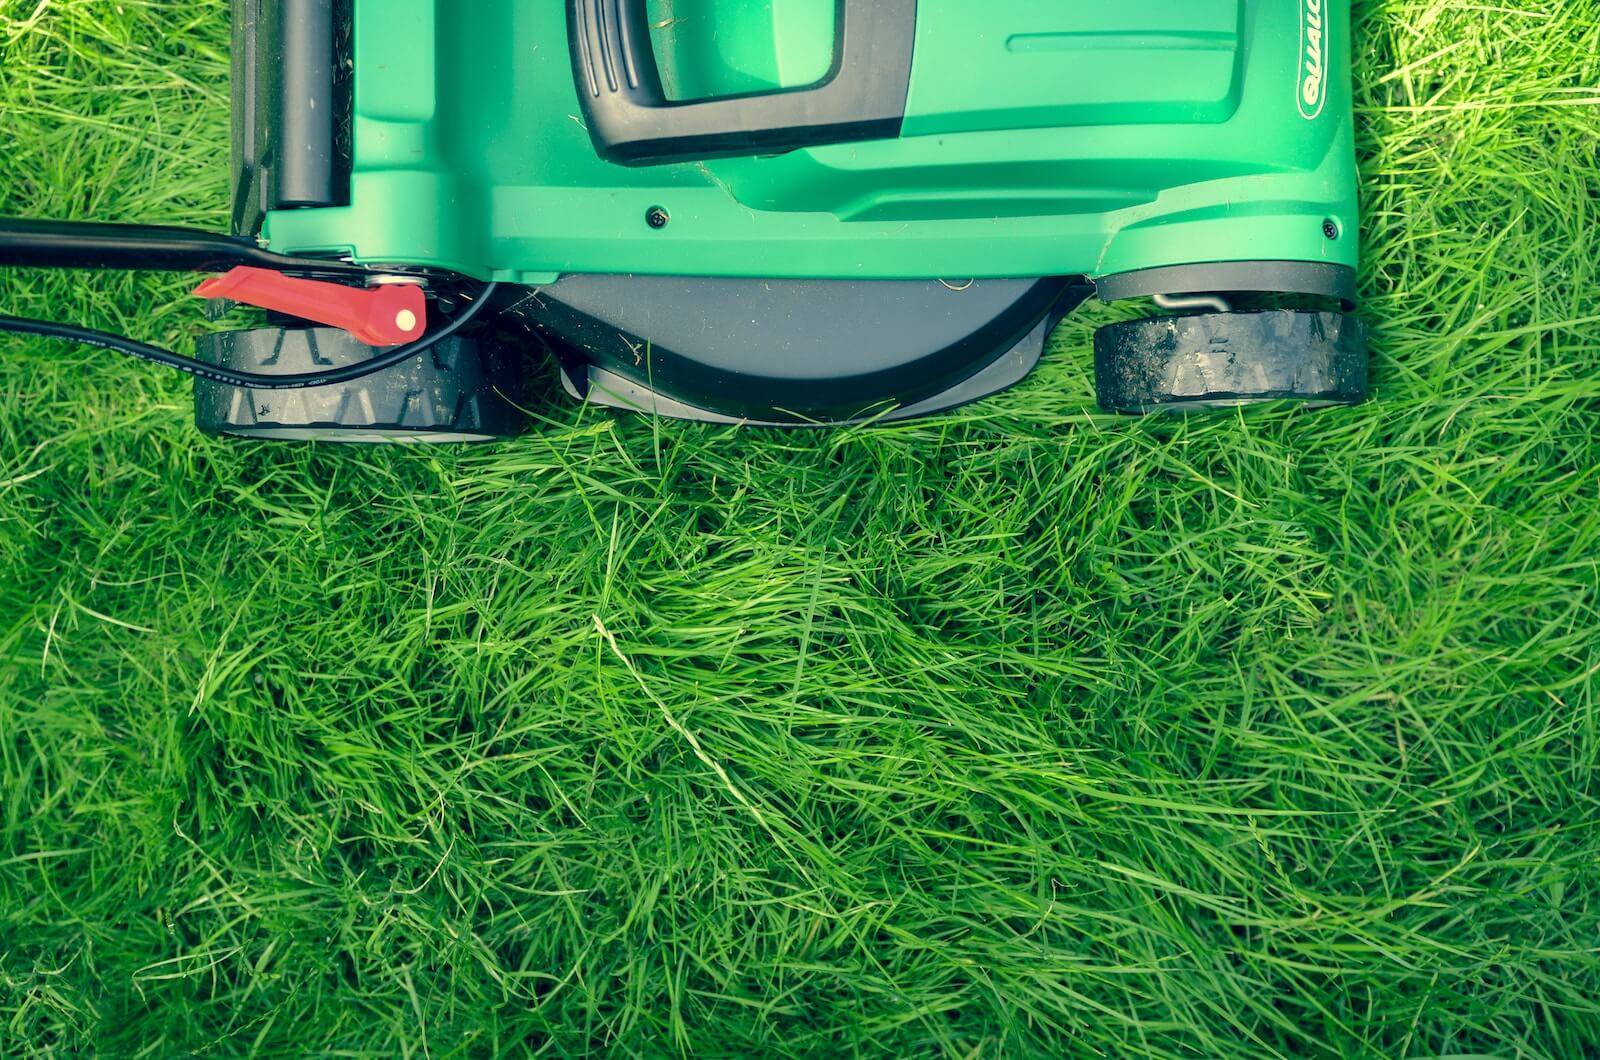 Best Electric Lawn Mowers: Top 5 Brands Most Recommended By Experts 